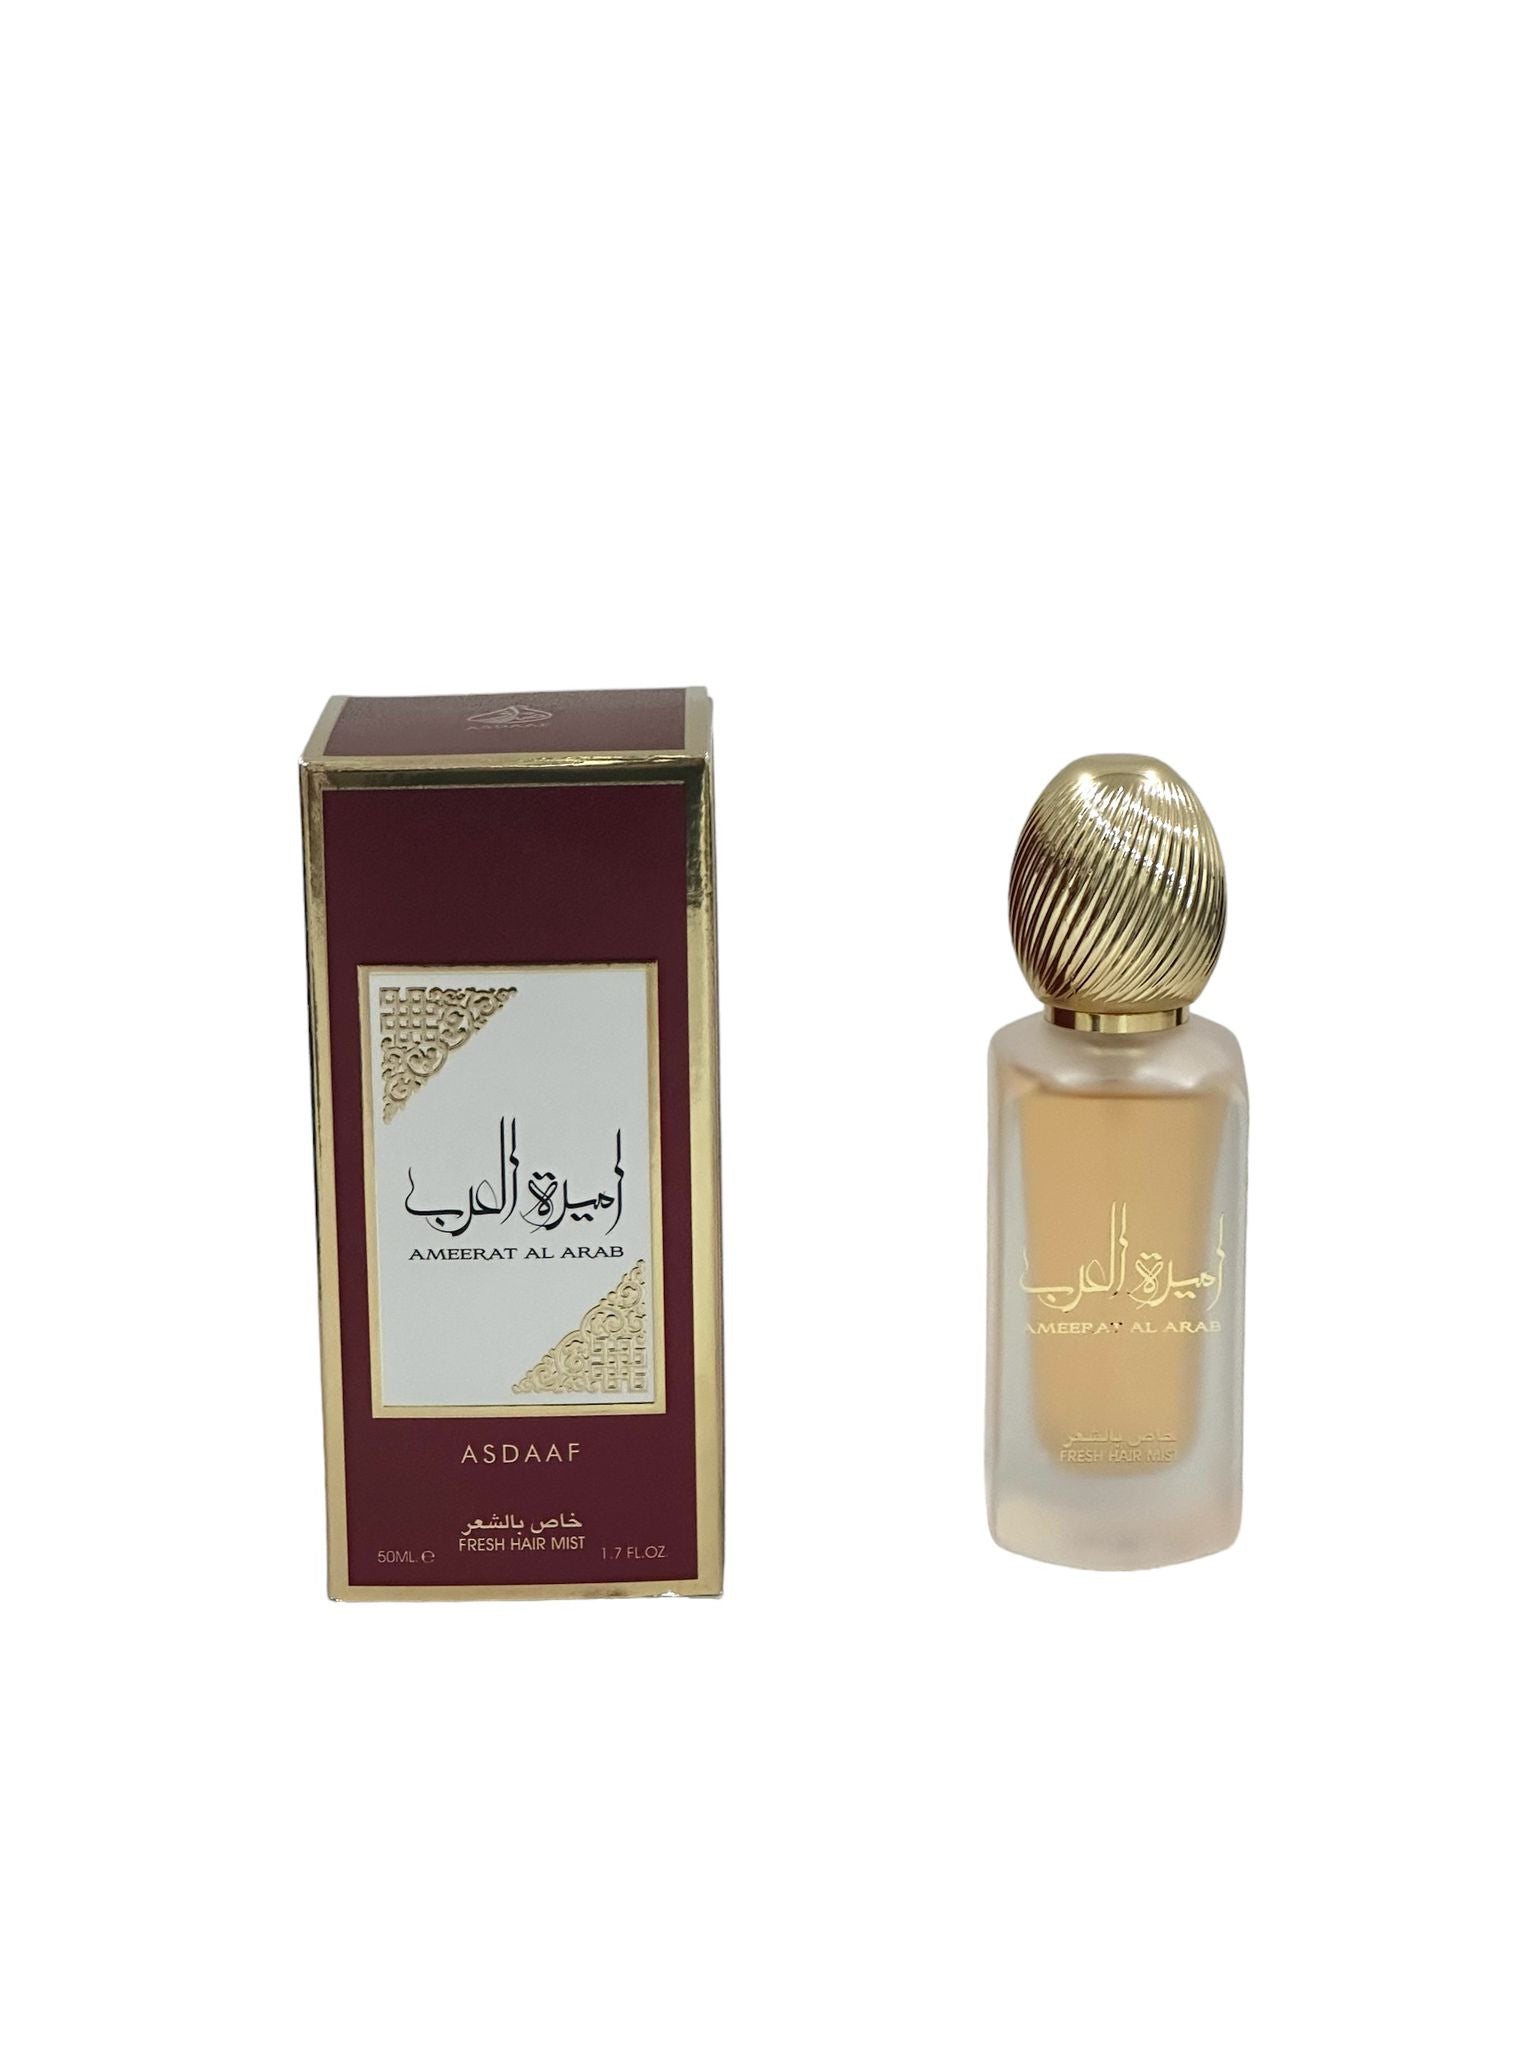  The image displays a maroon and gold packaging box alongside a frosted glass perfume bottle with a gold ribbed cap. The box has the name "AMEERAT AL ARAB" in white against a gold background on both the English and Arabic scripts, with the brand "ASDAAF" below it. Below on the box, it states "50ML / FRESH HAIR MIST / 1.7 FL.OZ."